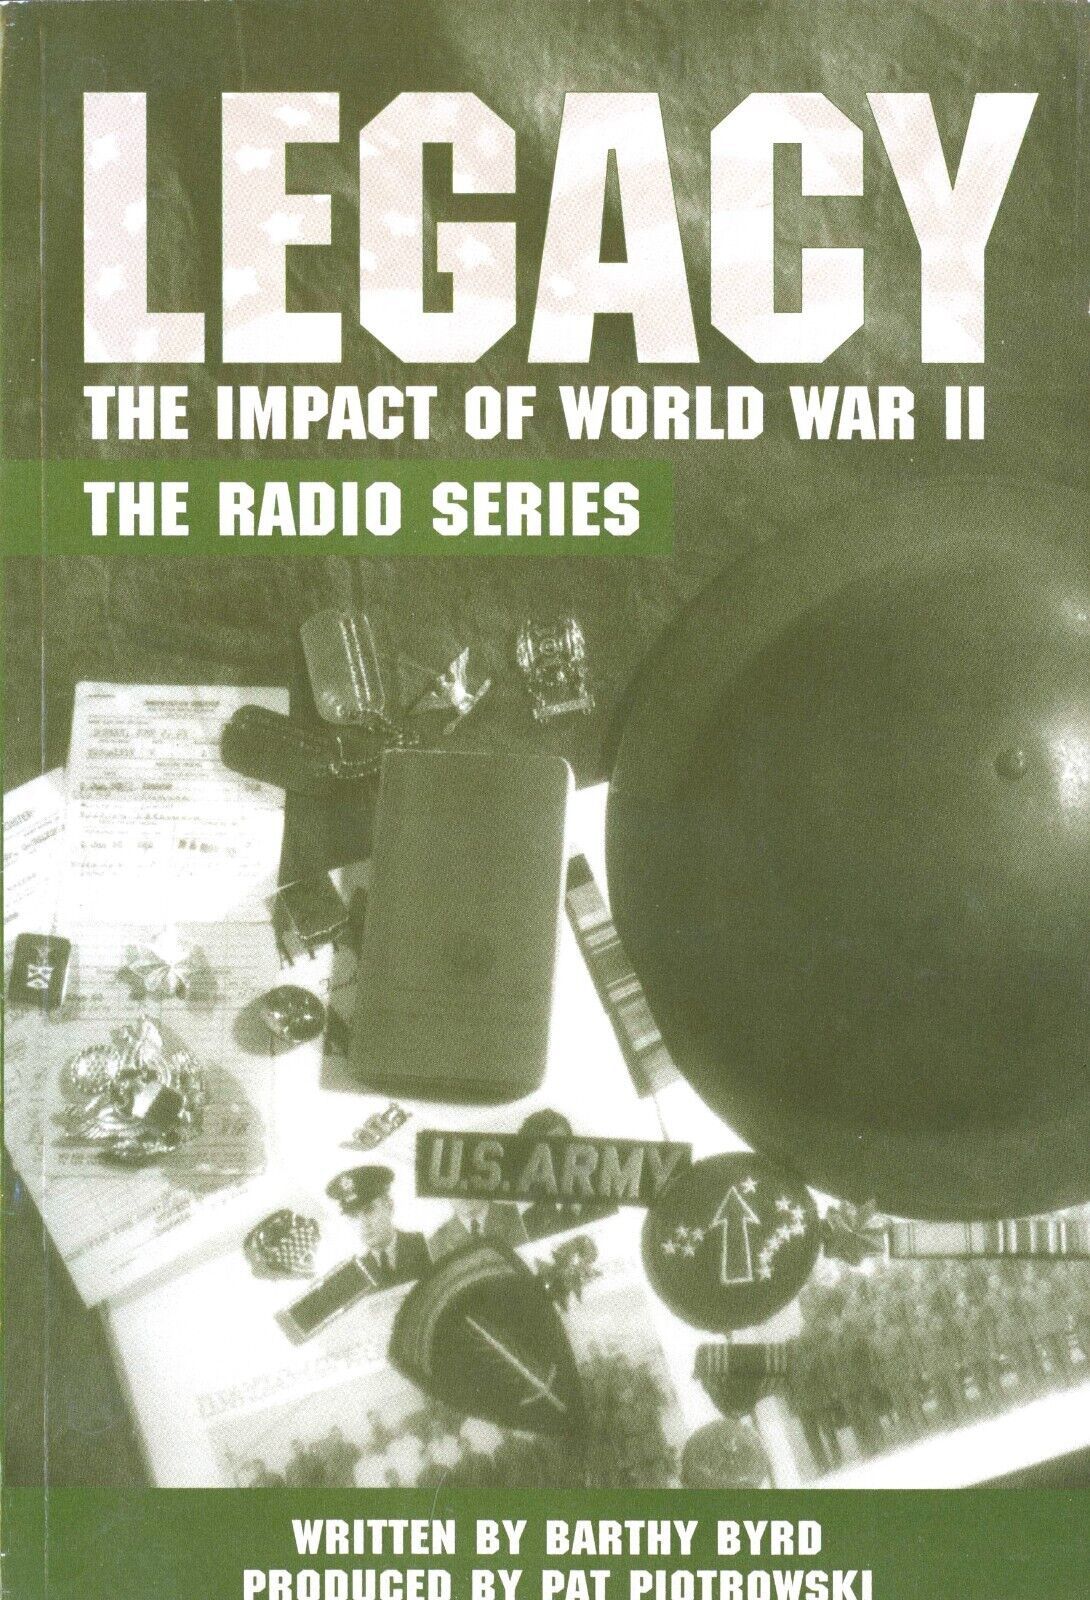 Primary image for Legacy: The Impact of World War II, The Radio Series by Barthy Byrd